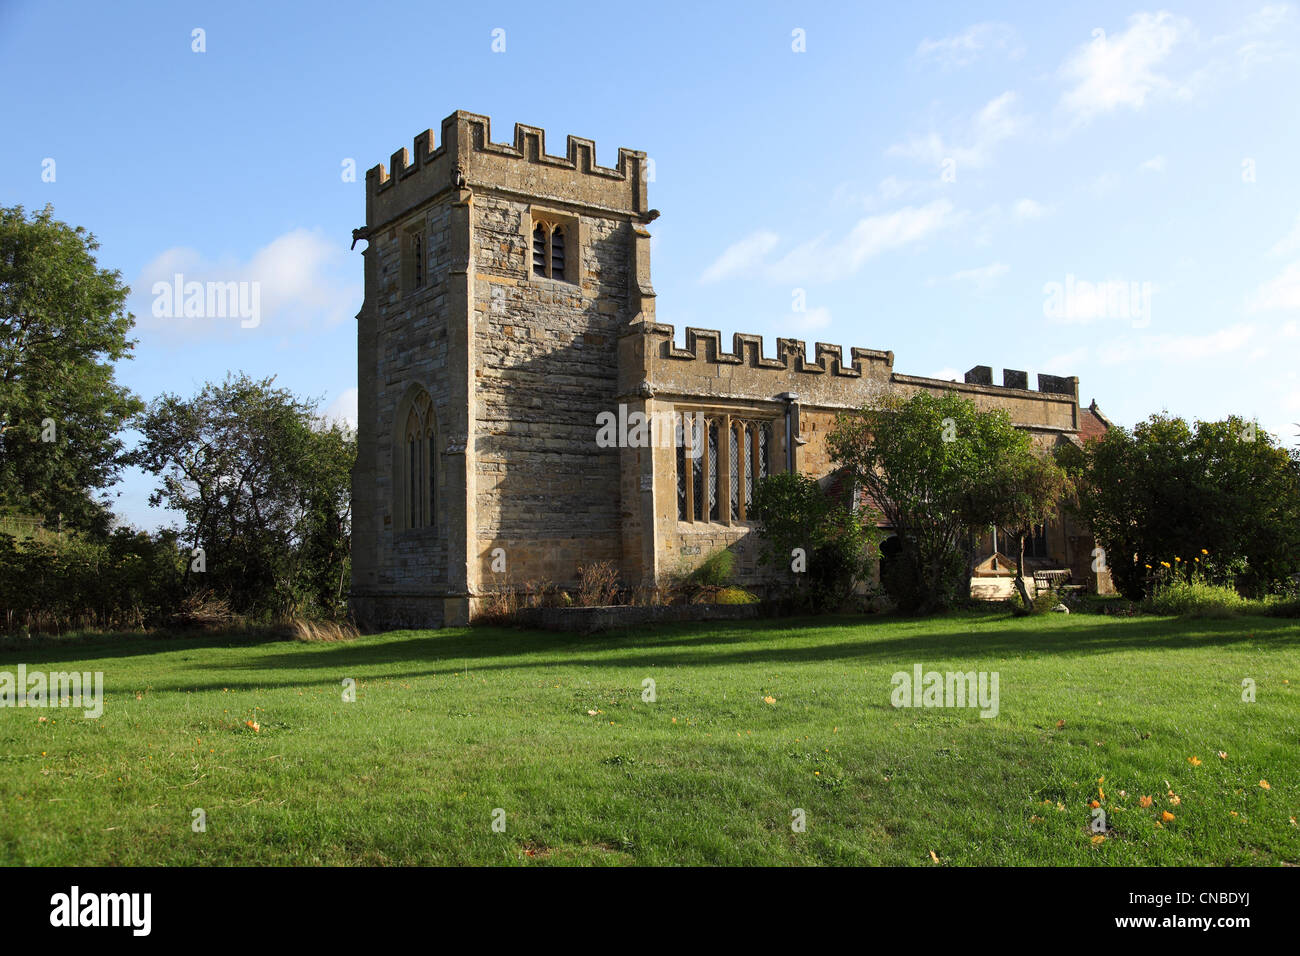 All Saints Church, Weston on Avon, a hamlet in rural Warwickshire. The present church mainly dates from the 15th Century. Stock Photo